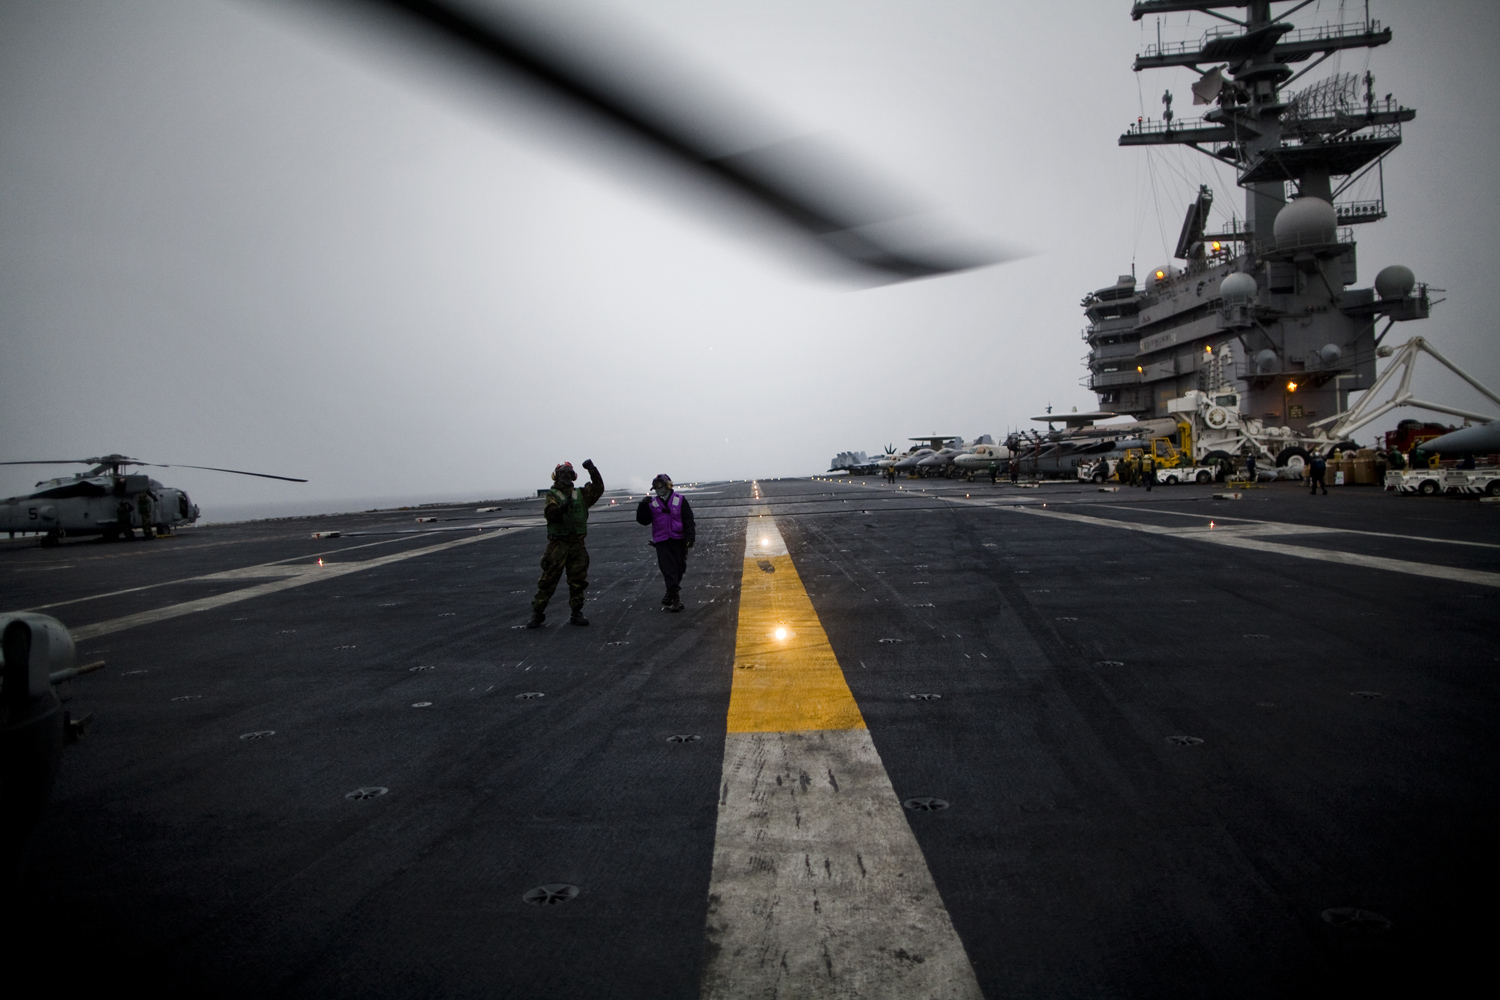 On the deck of the aircraft carrier USS Ronald Reagan stationed off the coast of Japan's Sendai region. March 21, 2011